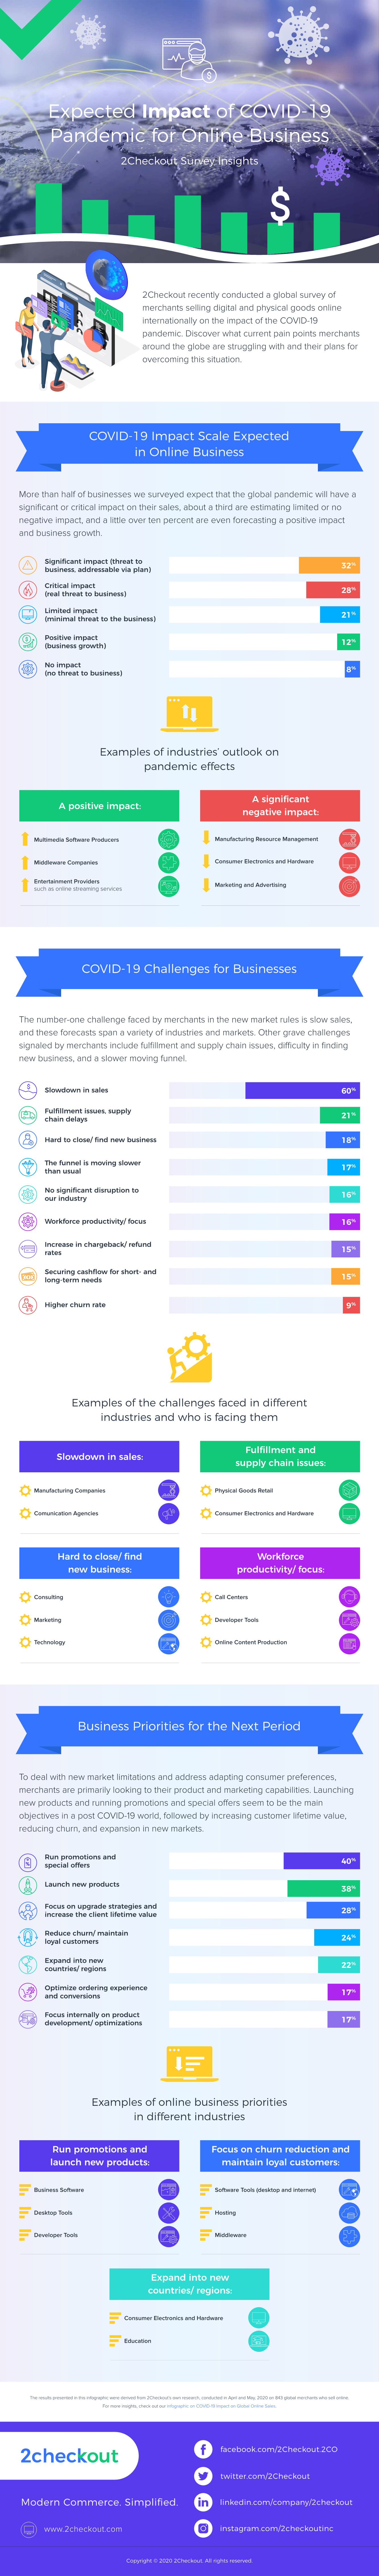 2Checkout COVID-19 infographic